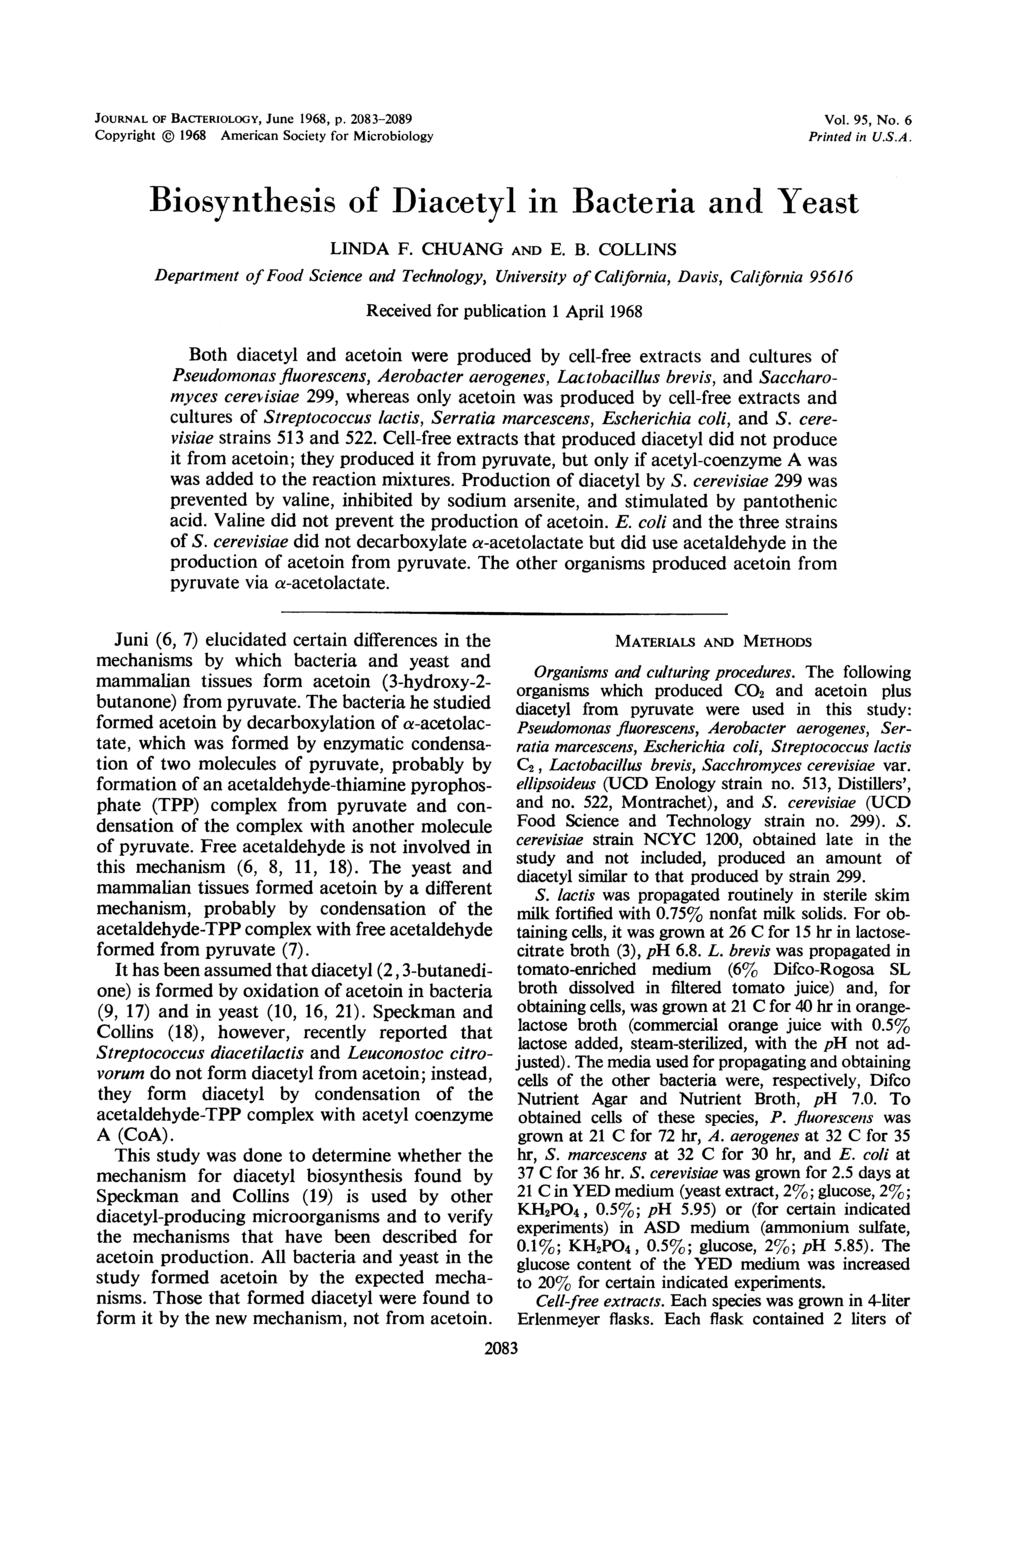 JOURNAL OF BACTERIOLOGY, June 1968, p. 2083-2089 Copyright @ 1968 American Society for Microbiology Vol. 95, No. 6 Printed in U.S.A. Biosynthesis of Diacetyl in Bacteria and Yeast LINDA F.